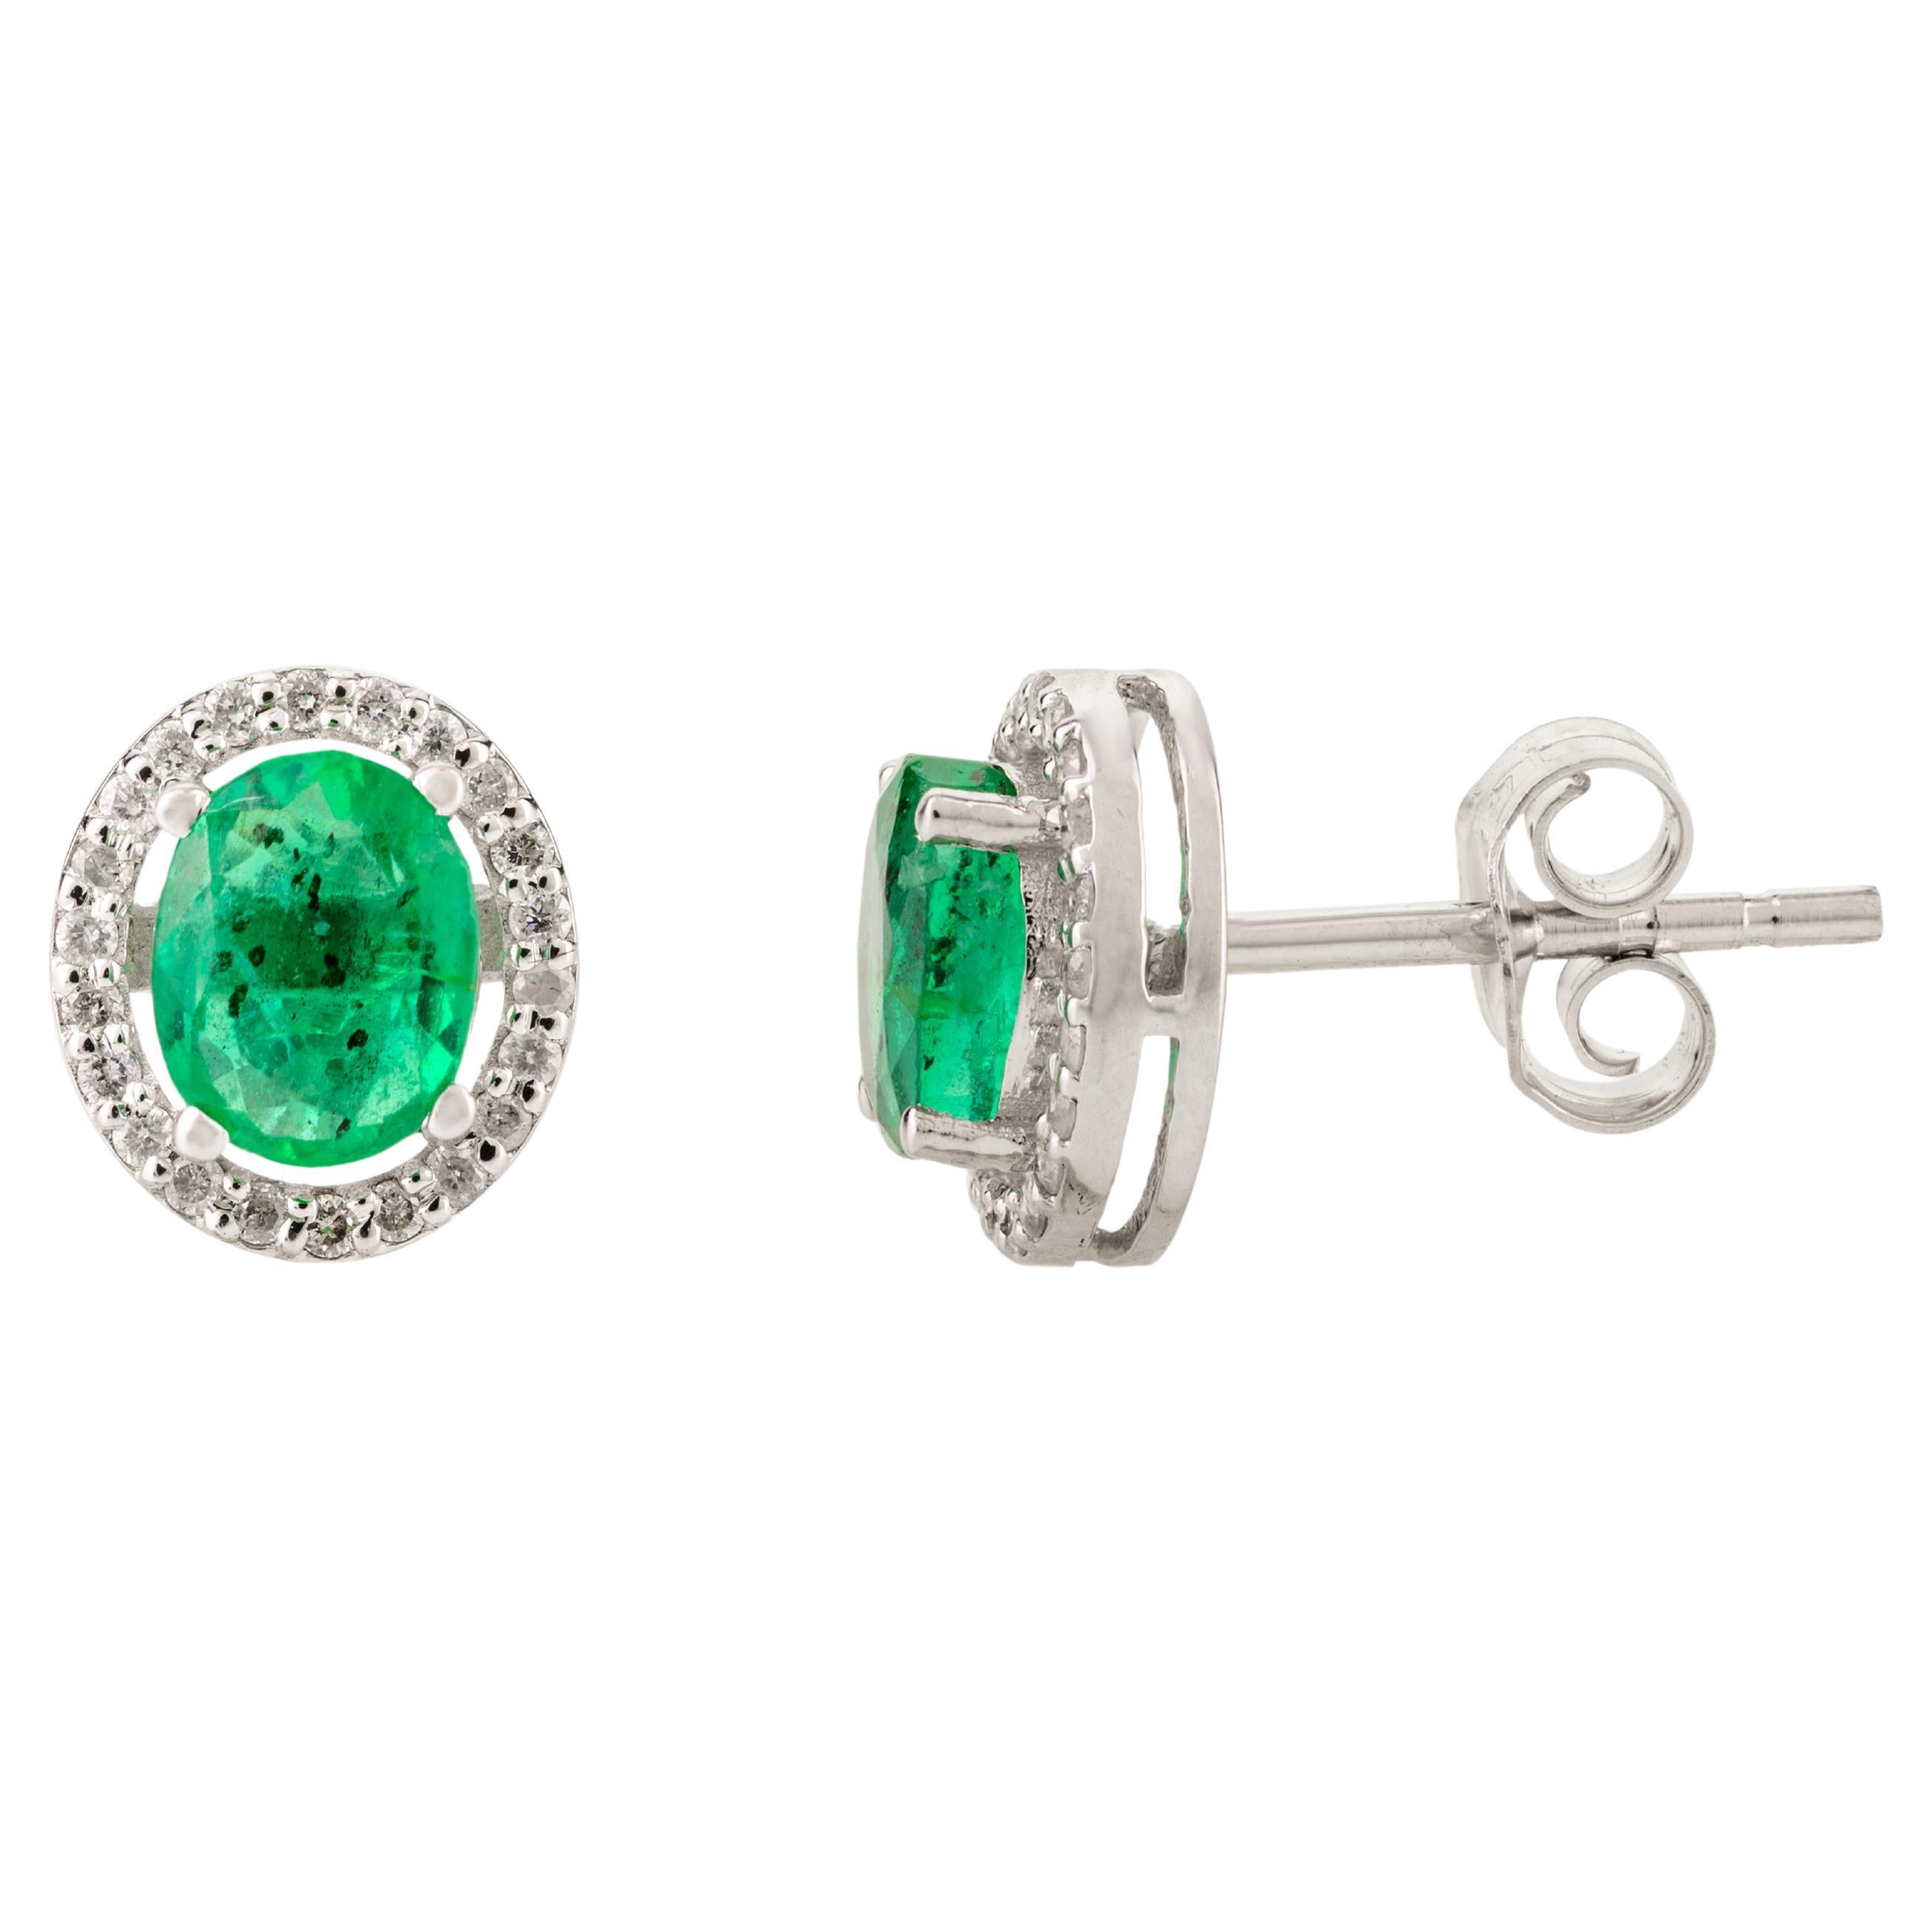 Natural Emerald Diamond Halo Oval Stud Earrings in 14k White Gold Gift for Mom For Sale